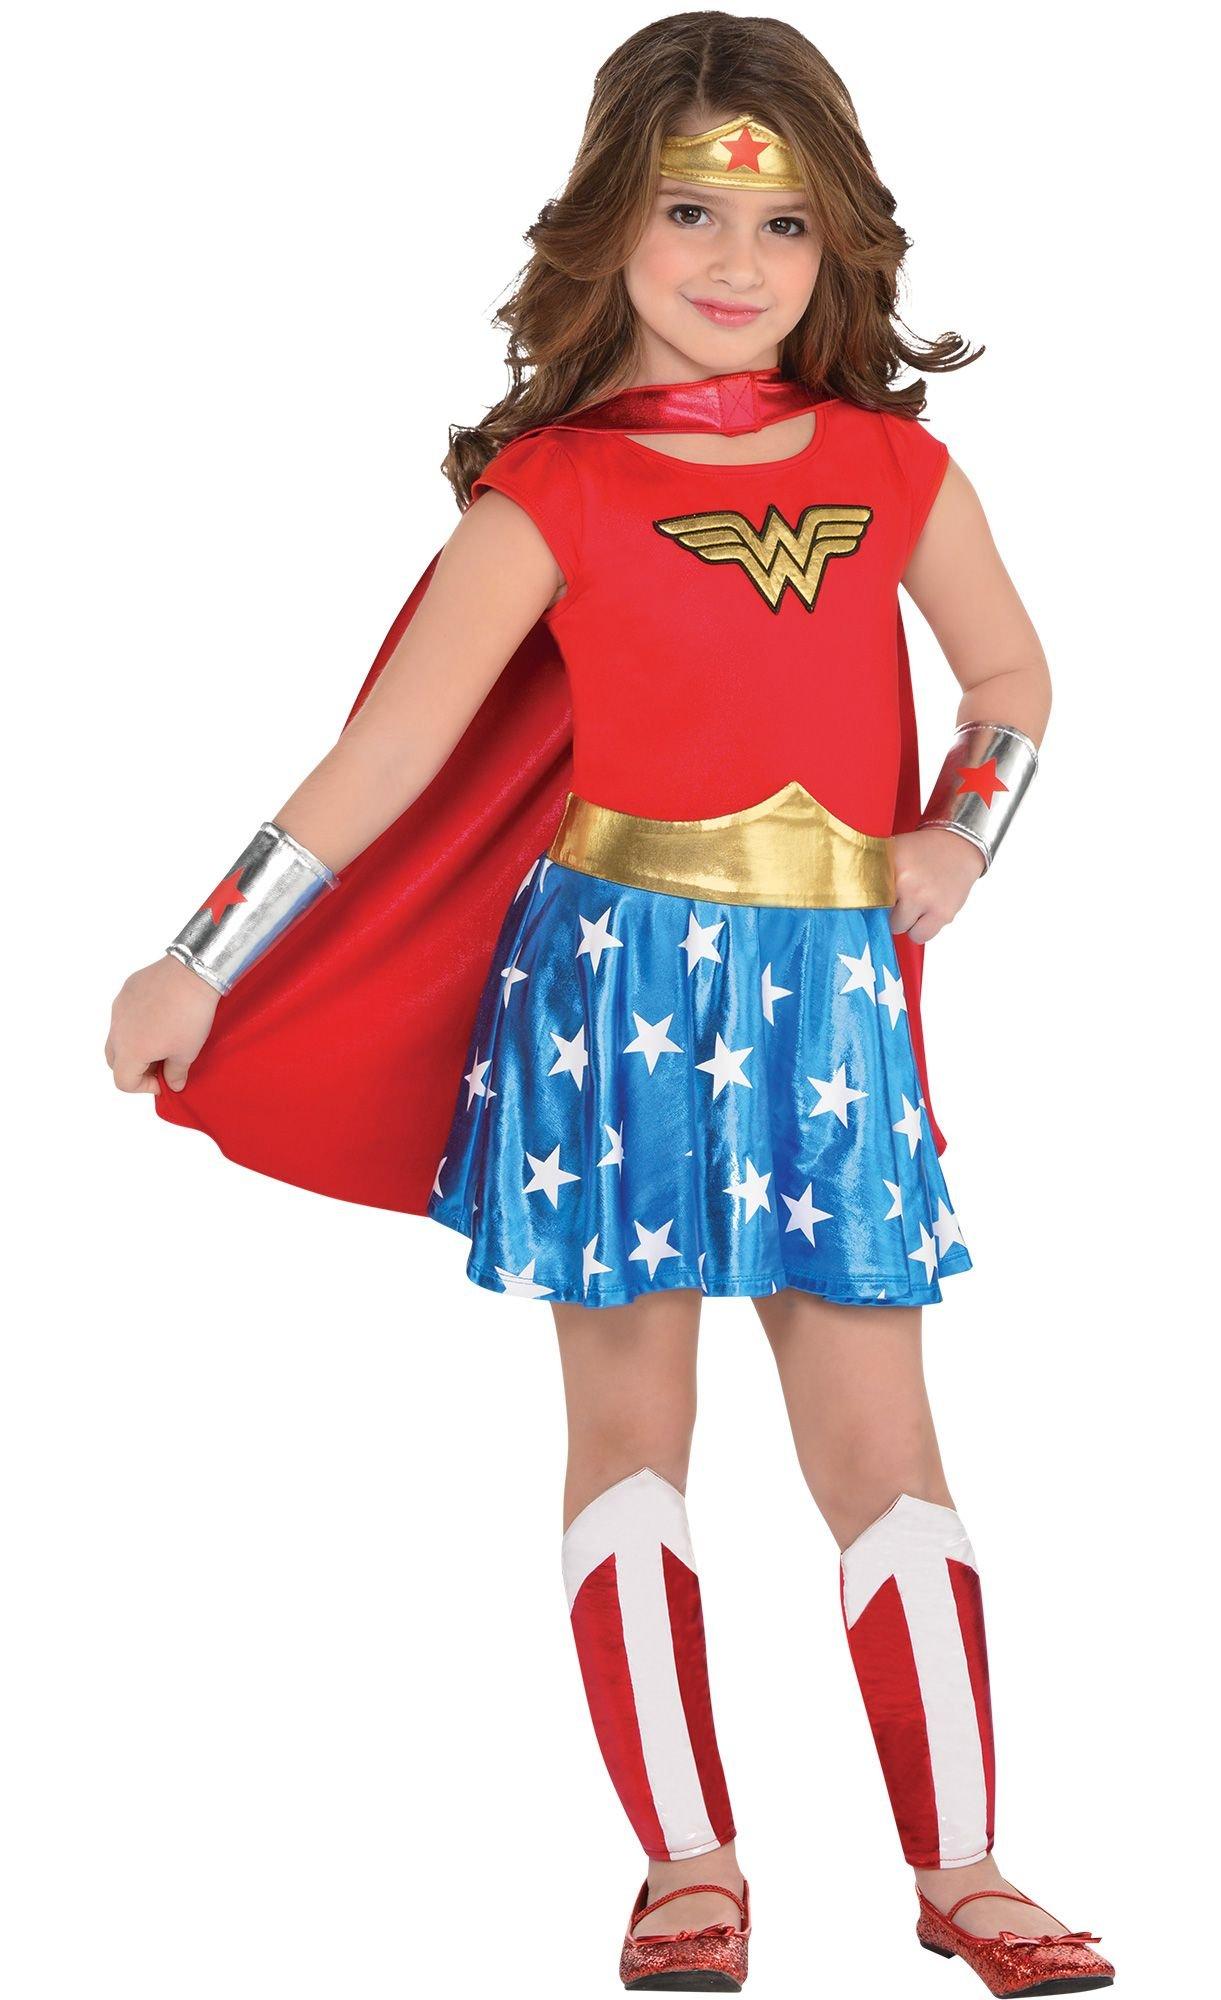 Licensed Child Wonder Woman Fancy Dress Classic Costume Kids Girls Ages  3-12 New